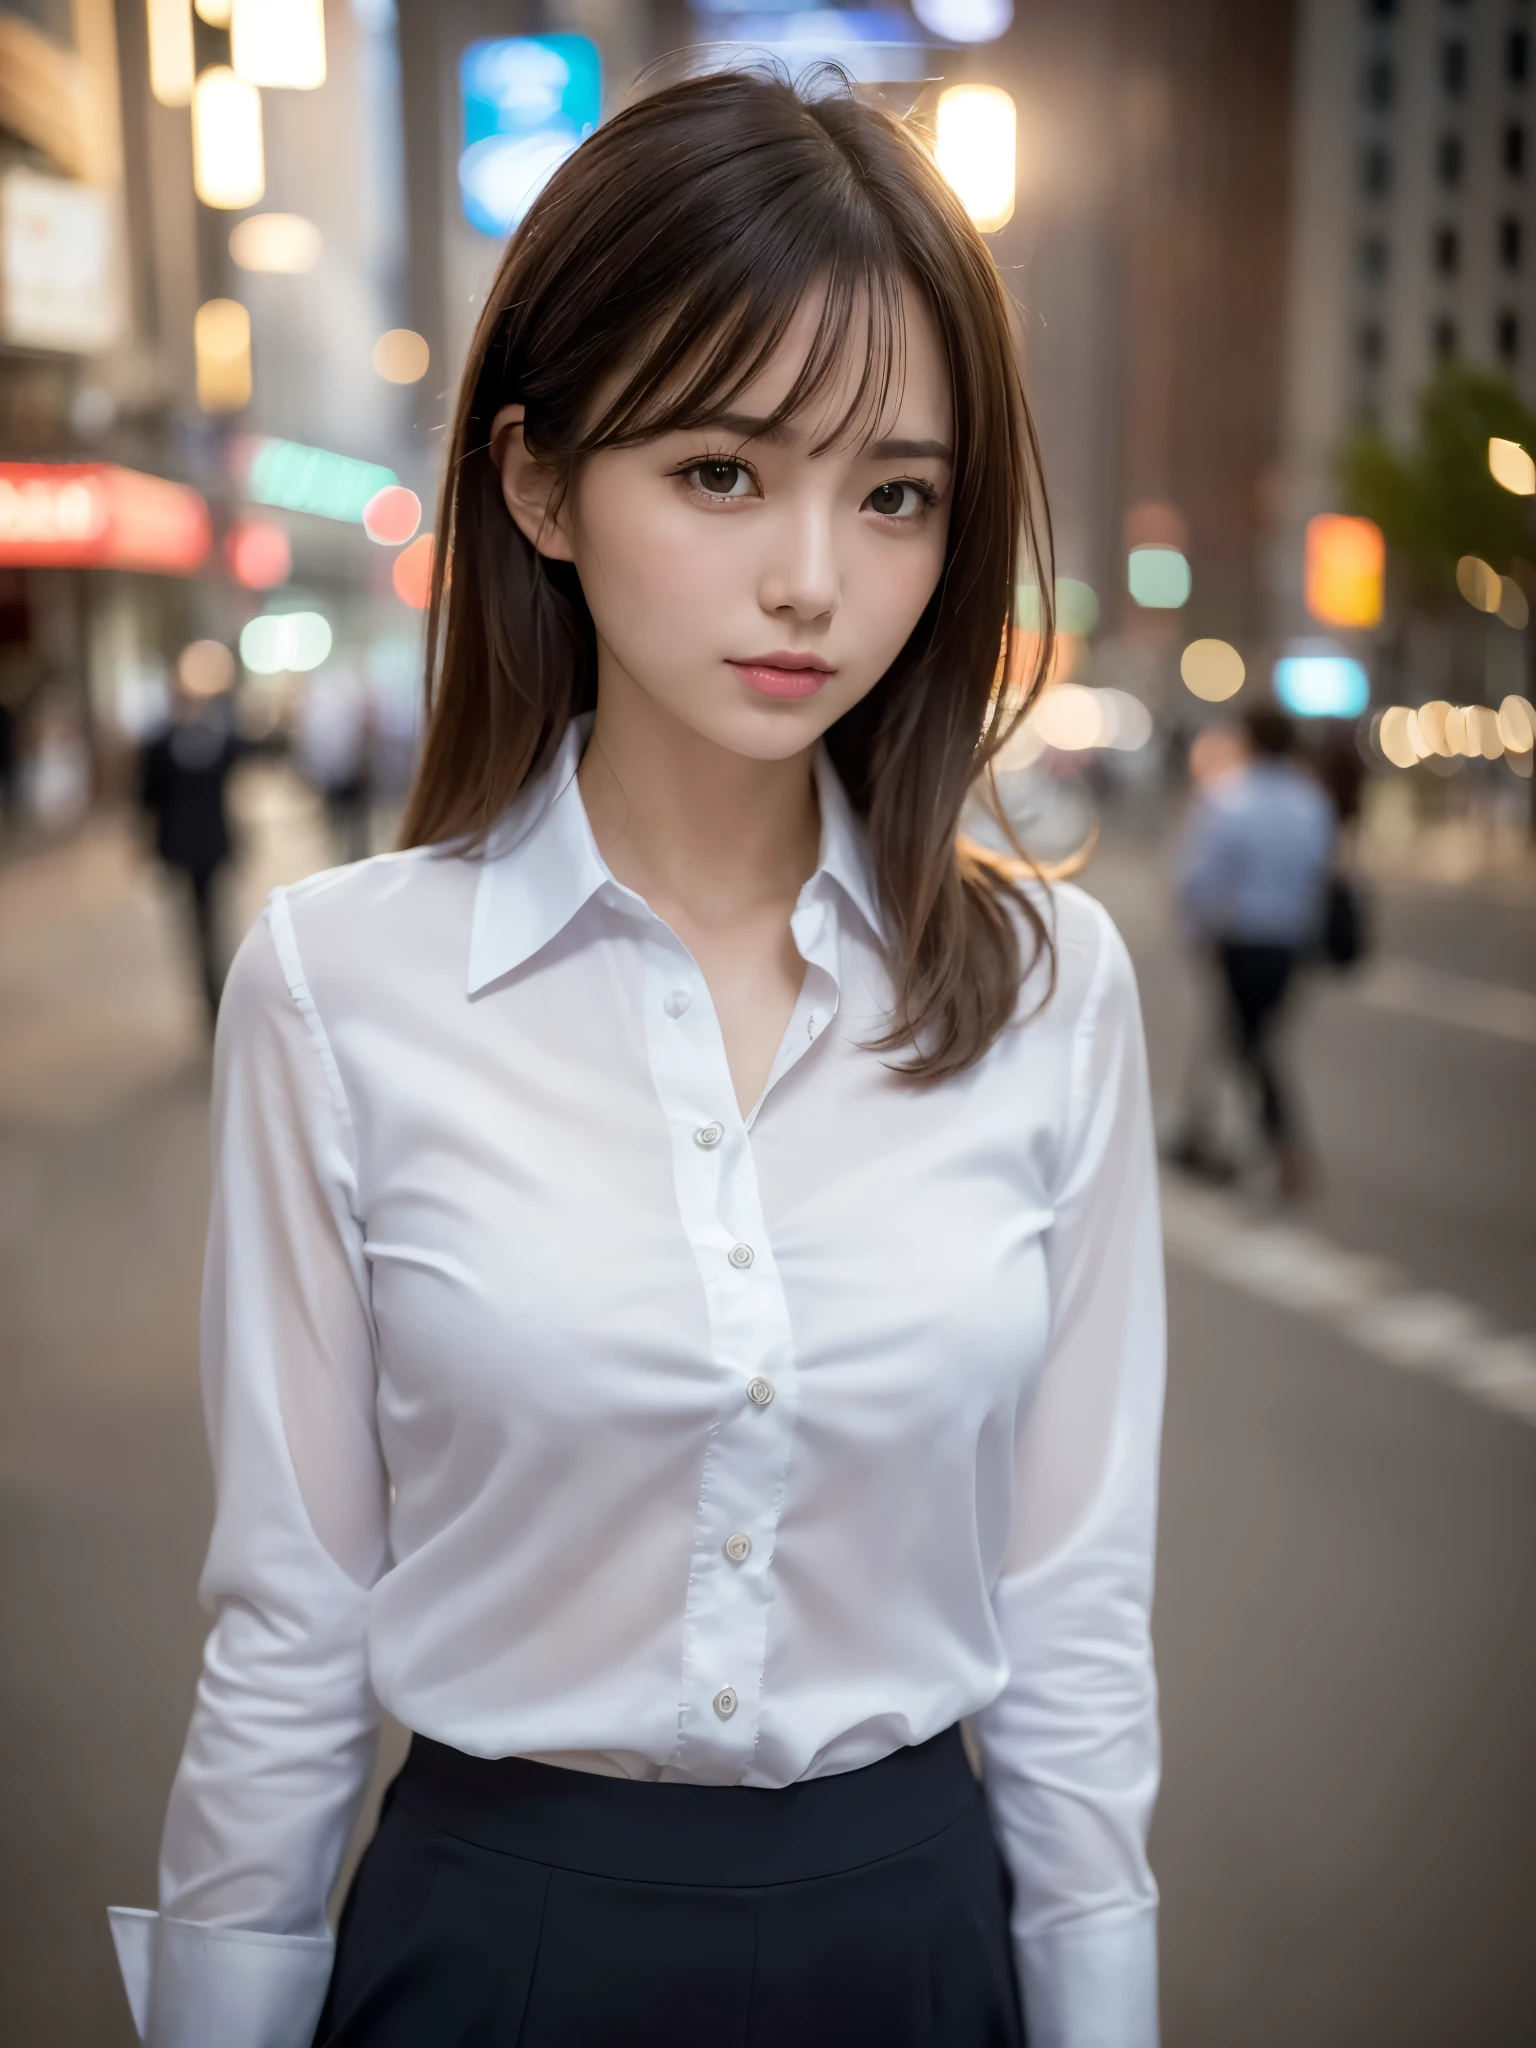 ((top quality, 8k, masterpiece: 1.3, raw photo)), Sharp Focus: 1.2, (SOLO), (1 aespa girl: 1.2), (Realistic, Photorealistic: 1.37), (face focus: 1.1), cute face, small breasts, flat chest, short messy hair, (business shirt: 1.1), Beautiful Woman standing the city Under Lamp Light, cinematic lighting, thigh, chiffon panties,